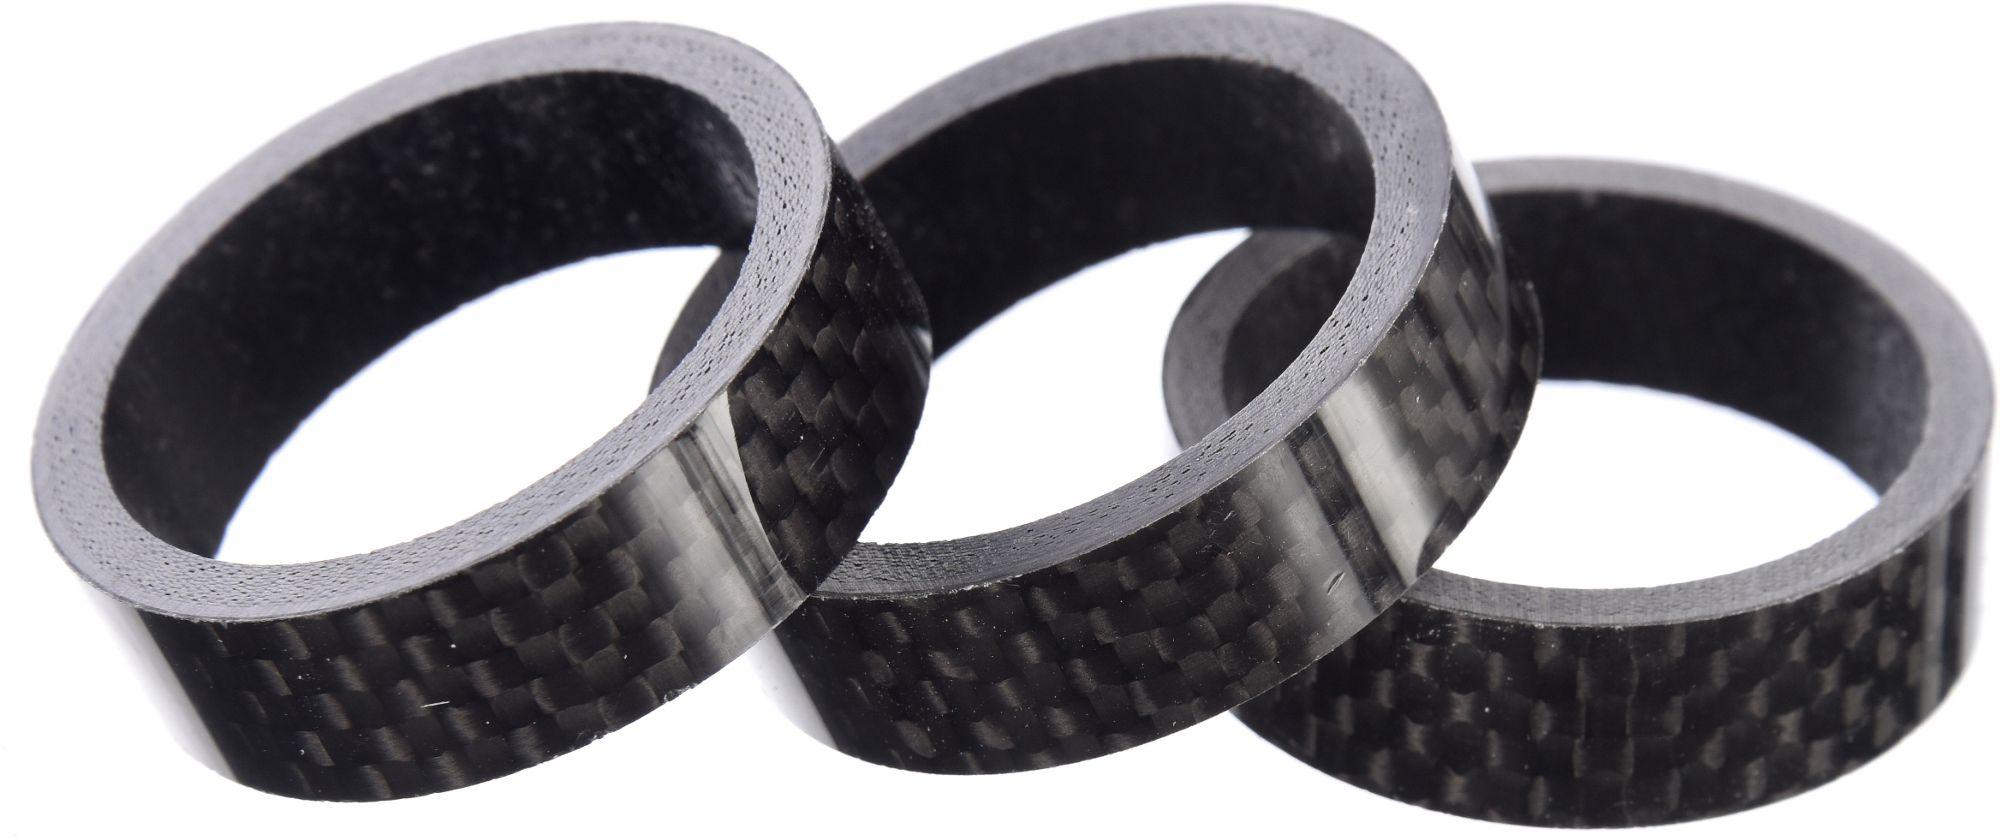 Brand-x Spacer Pack Carbon 3 X 10mm - Black